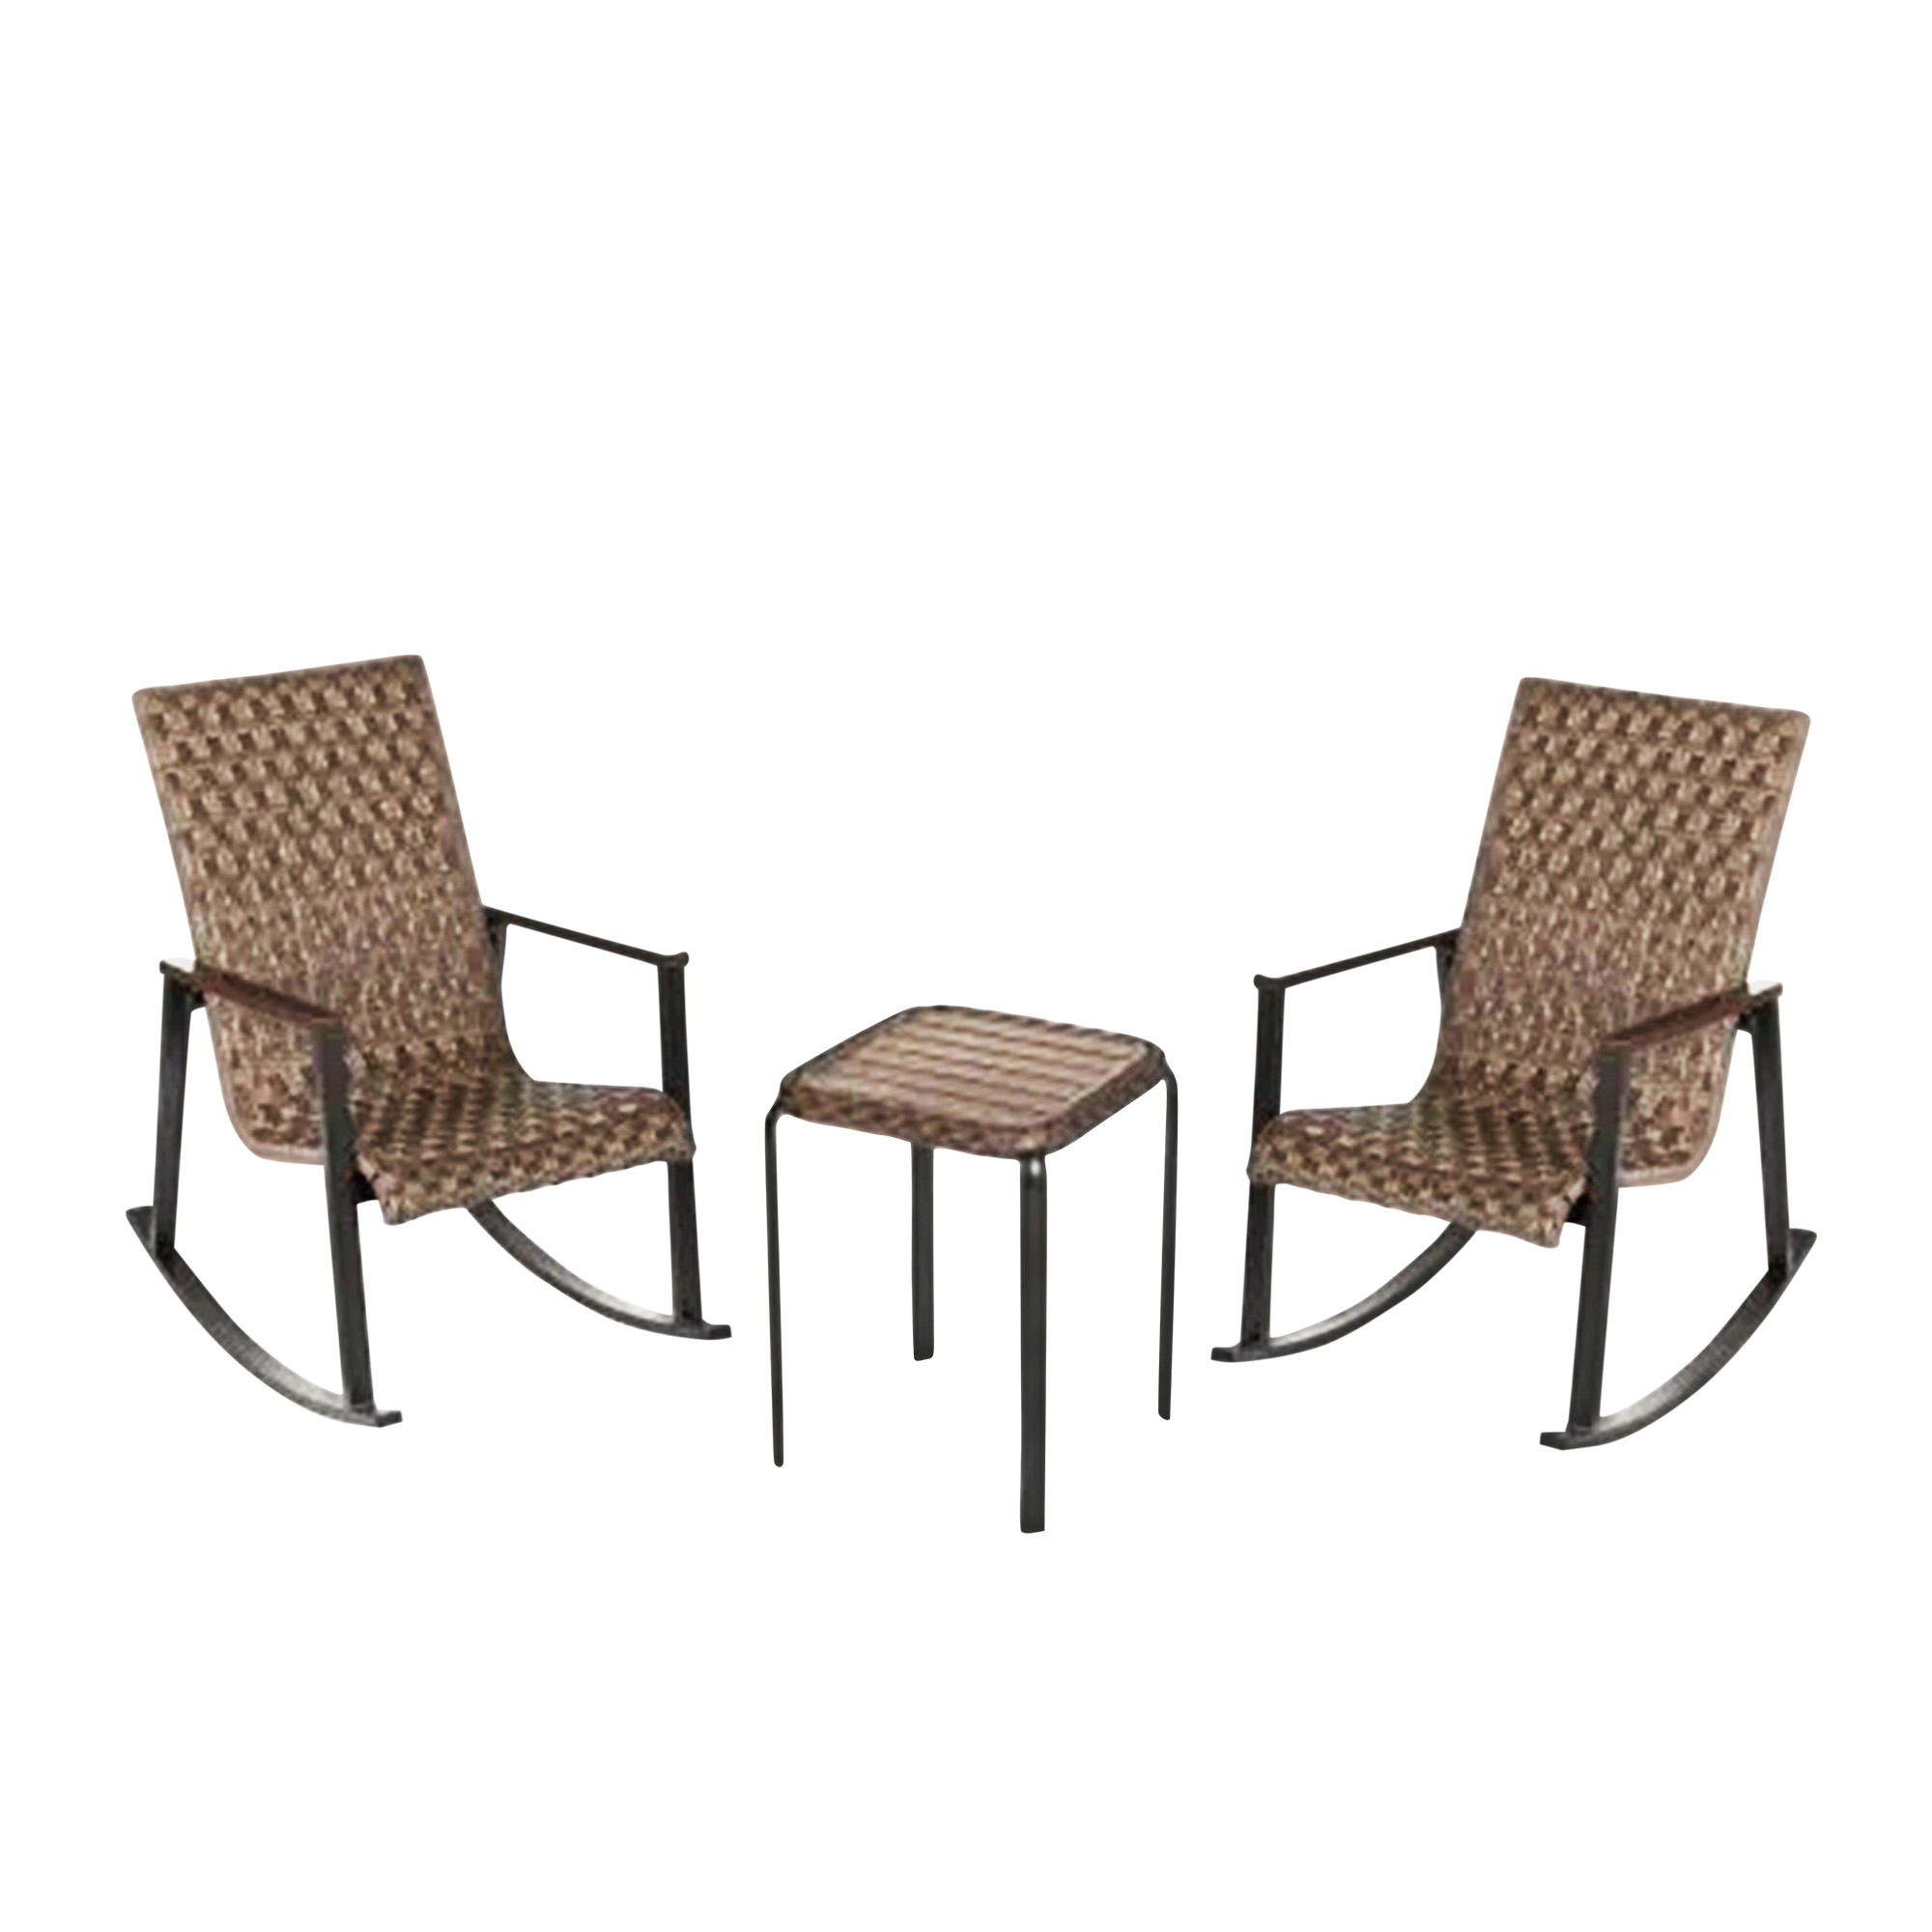 Four Seasons Courtyard Bayside 3 Piece All Weather Woven Wicker Chat Set - image 1 of 7